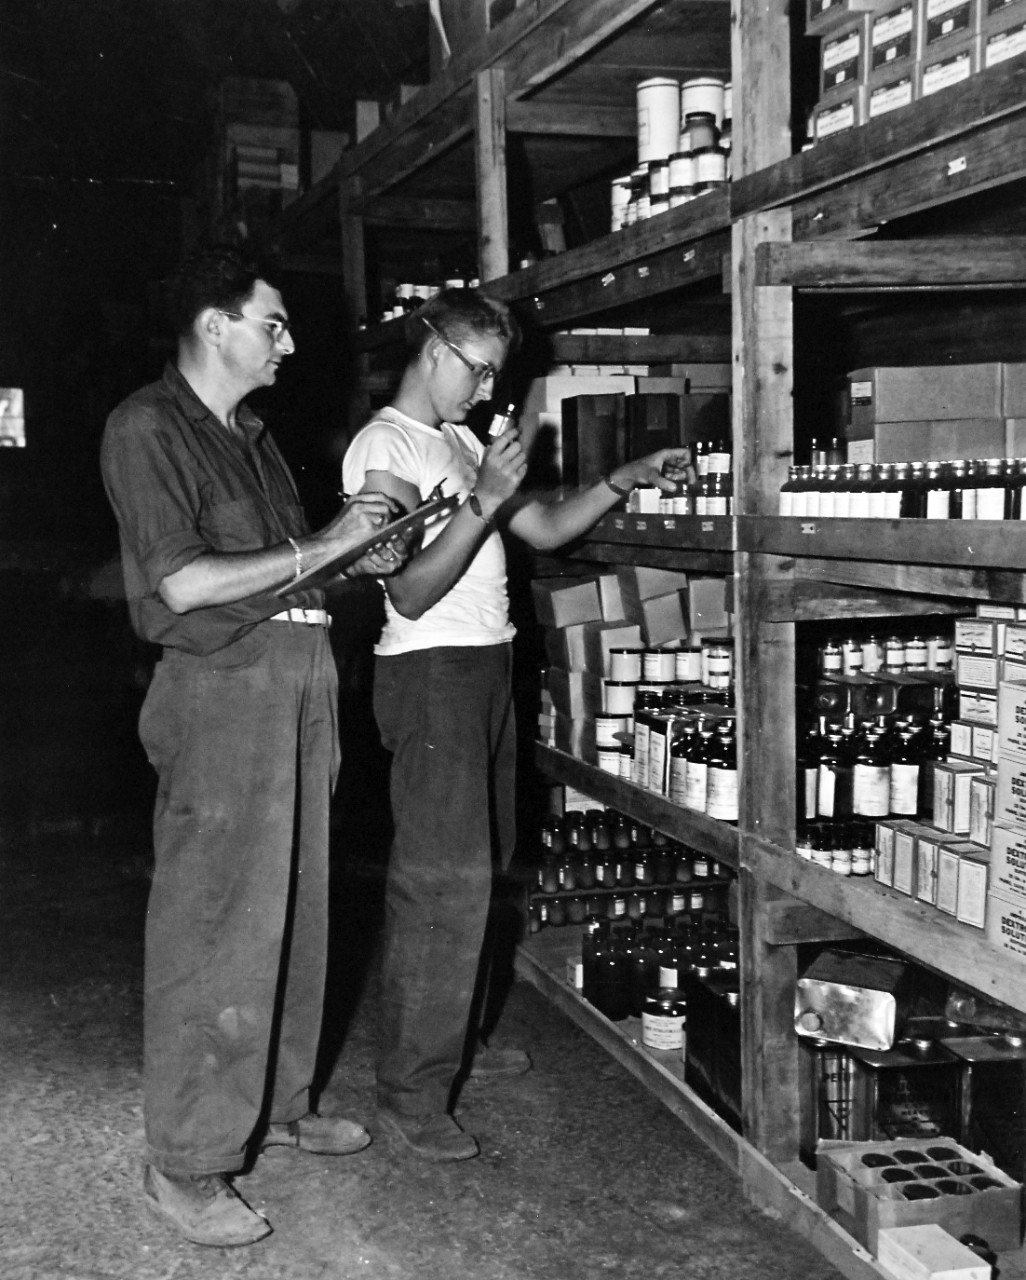 80-G-49580: Okinawa Campaign, April-June 1945.  Progress of construction on Okinawa. Left to right:  PhM1/C Albert Smolens and HA1/C Robert E. Murray taking inventory of supplies (from pins to wheelchairs) in a warehouse with 8000 square feet of shelves made from salvaged lumbar.   Photograph received June 29, 1945.   Official U.S. Navy photograph, now in the collections of the National Archives.  (2017/01/10).